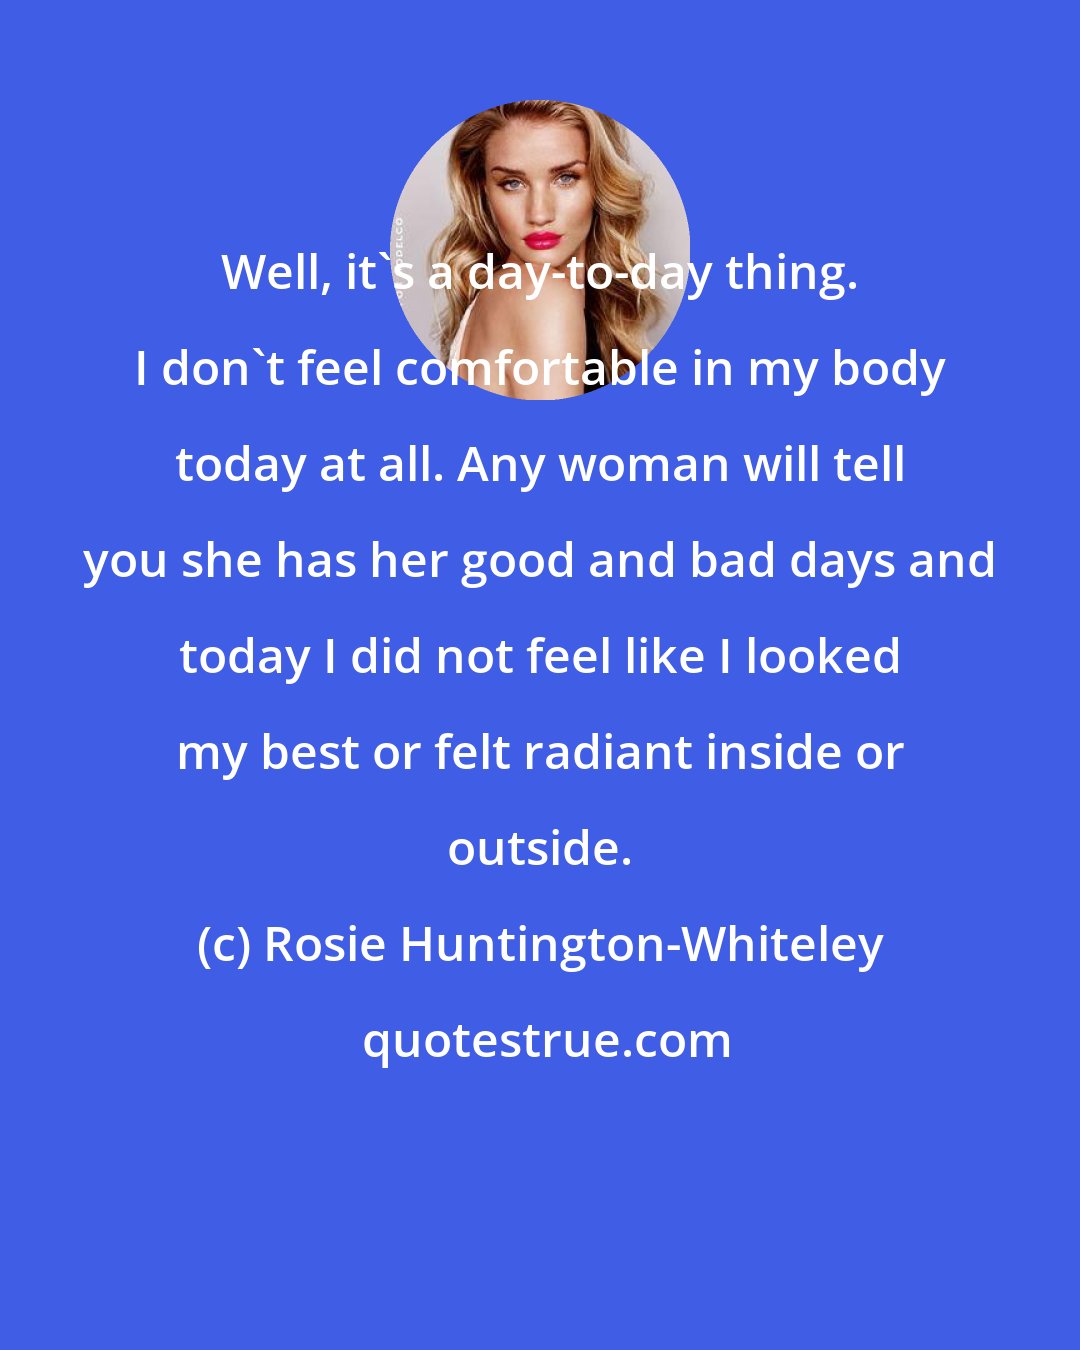 Rosie Huntington-Whiteley: Well, it's a day-to-day thing. I don't feel comfortable in my body today at all. Any woman will tell you she has her good and bad days and today I did not feel like I looked my best or felt radiant inside or outside.